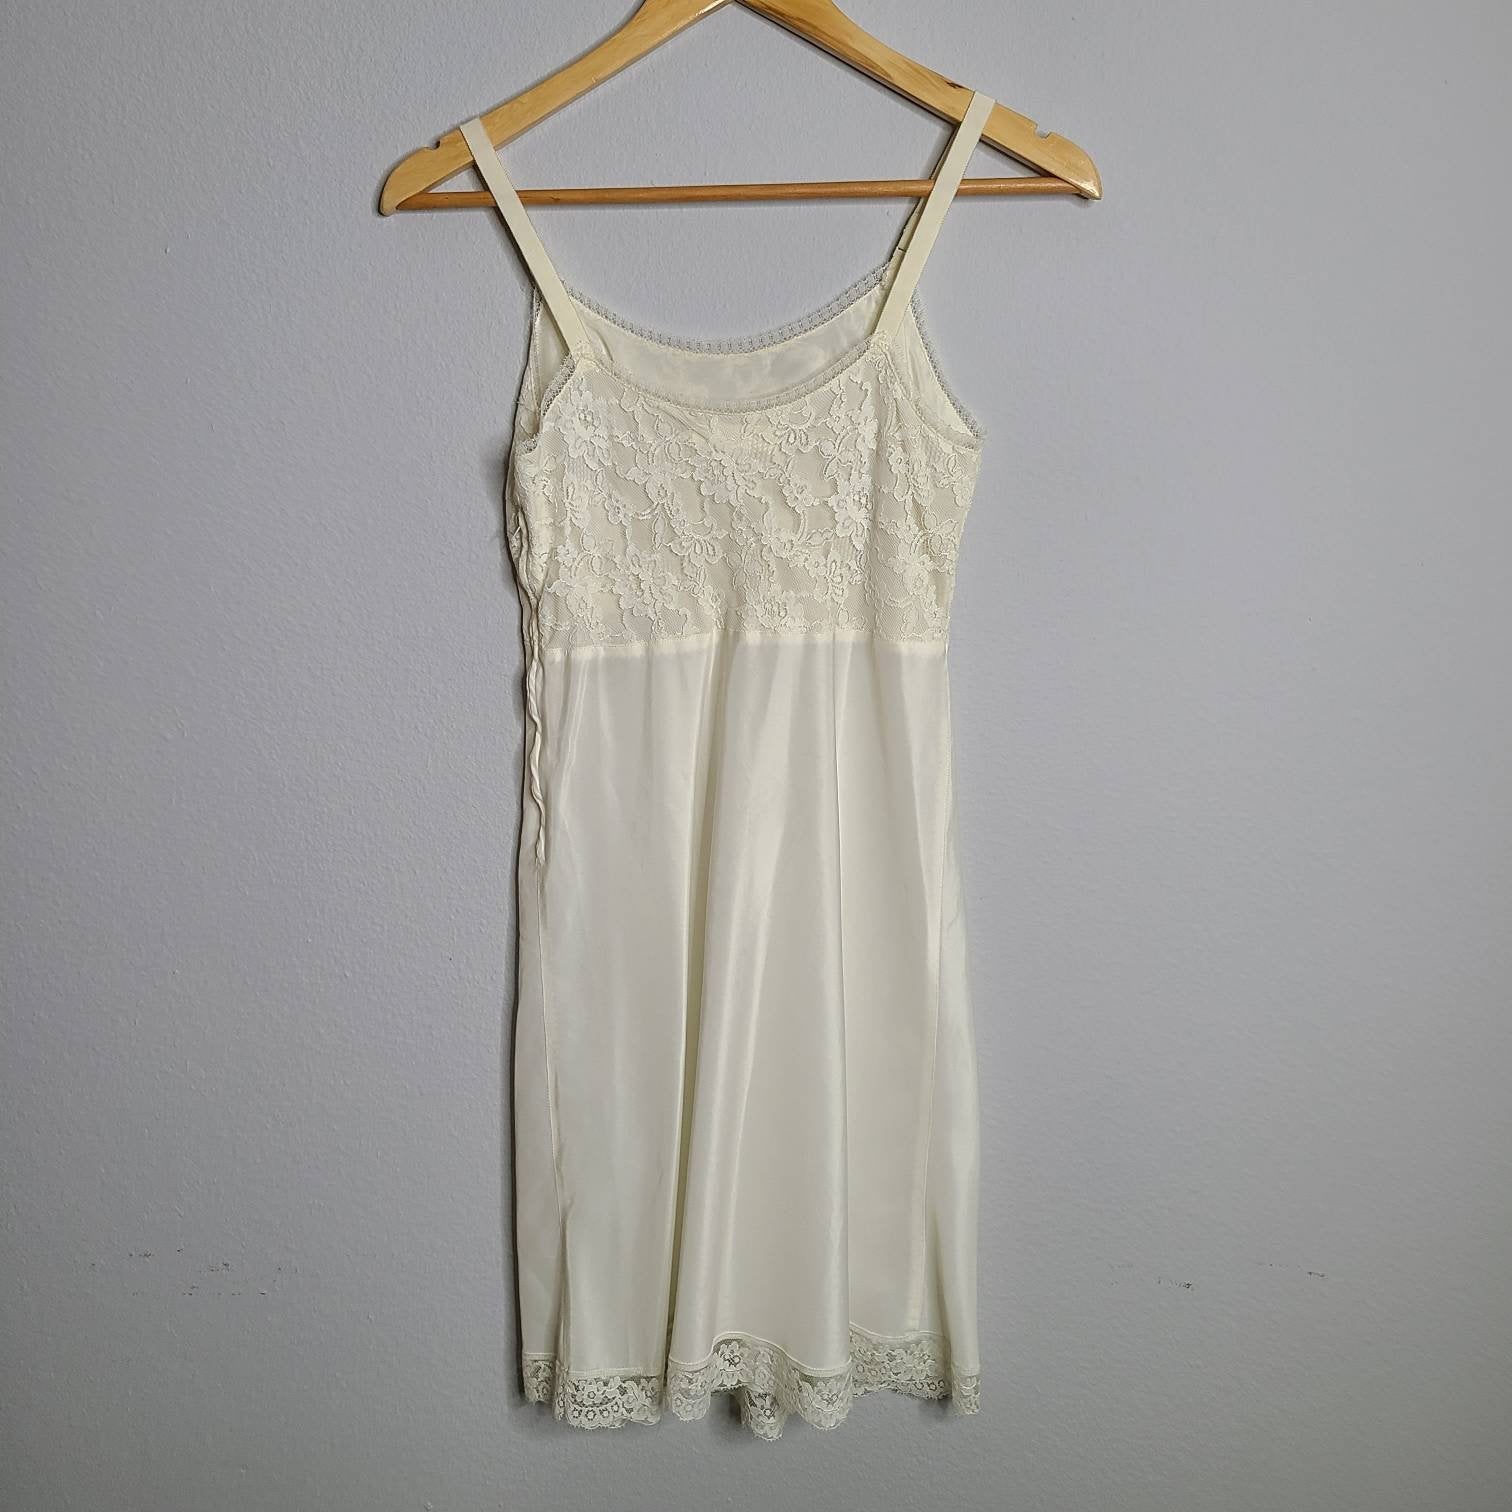 Vintage 50’s White Lace Bodice Slip by Barbizon - Free Shipping - Thrilling